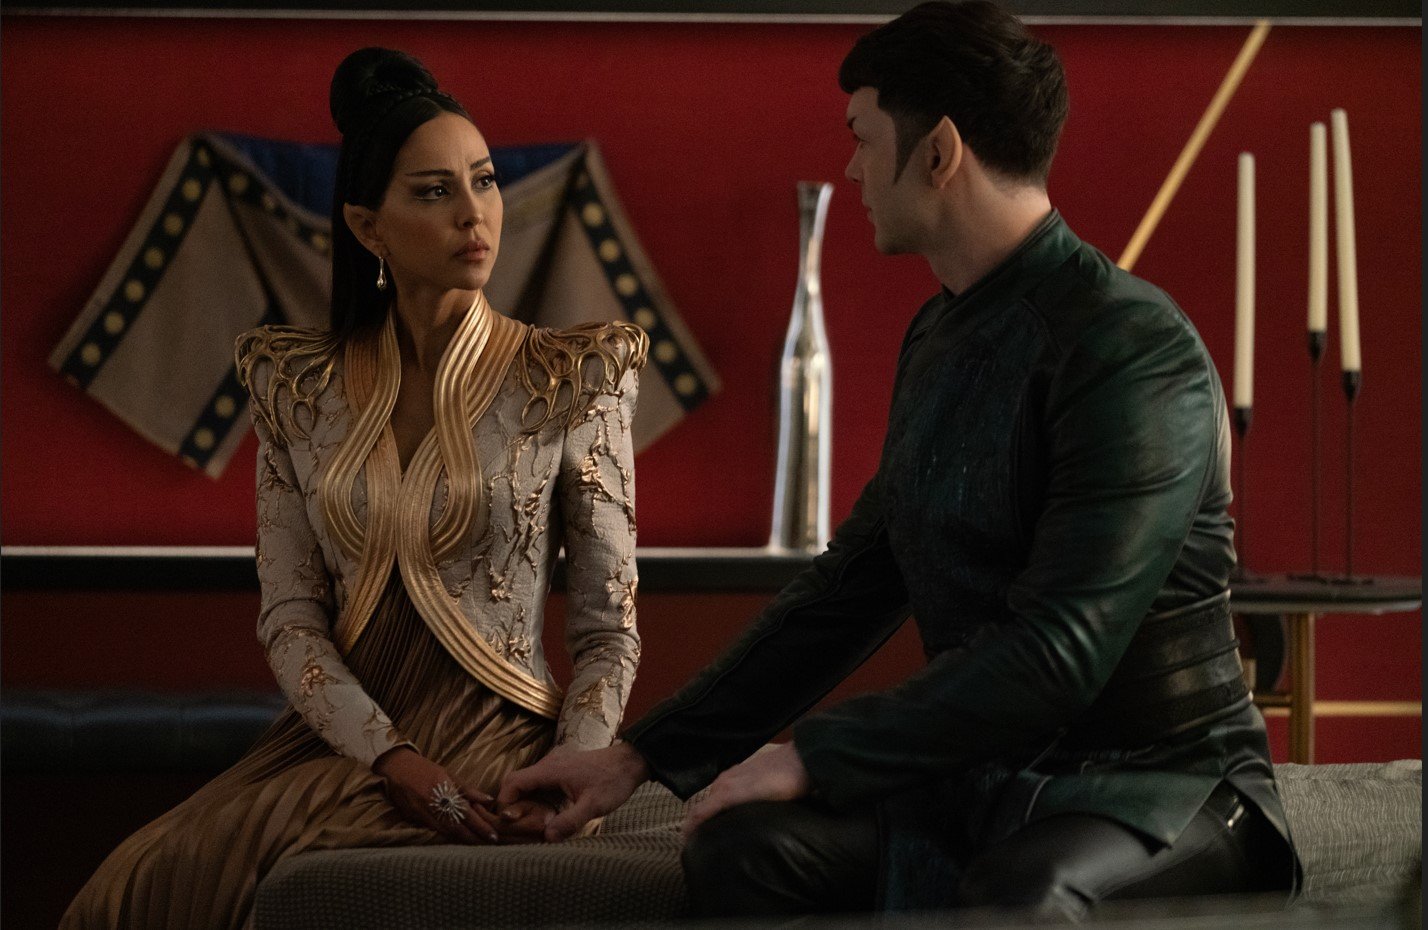   Gia Sandhu  as T'Pring and  Ethan Peck  as Spock. Photo Credit: Michael Gibson/Paramount+ 